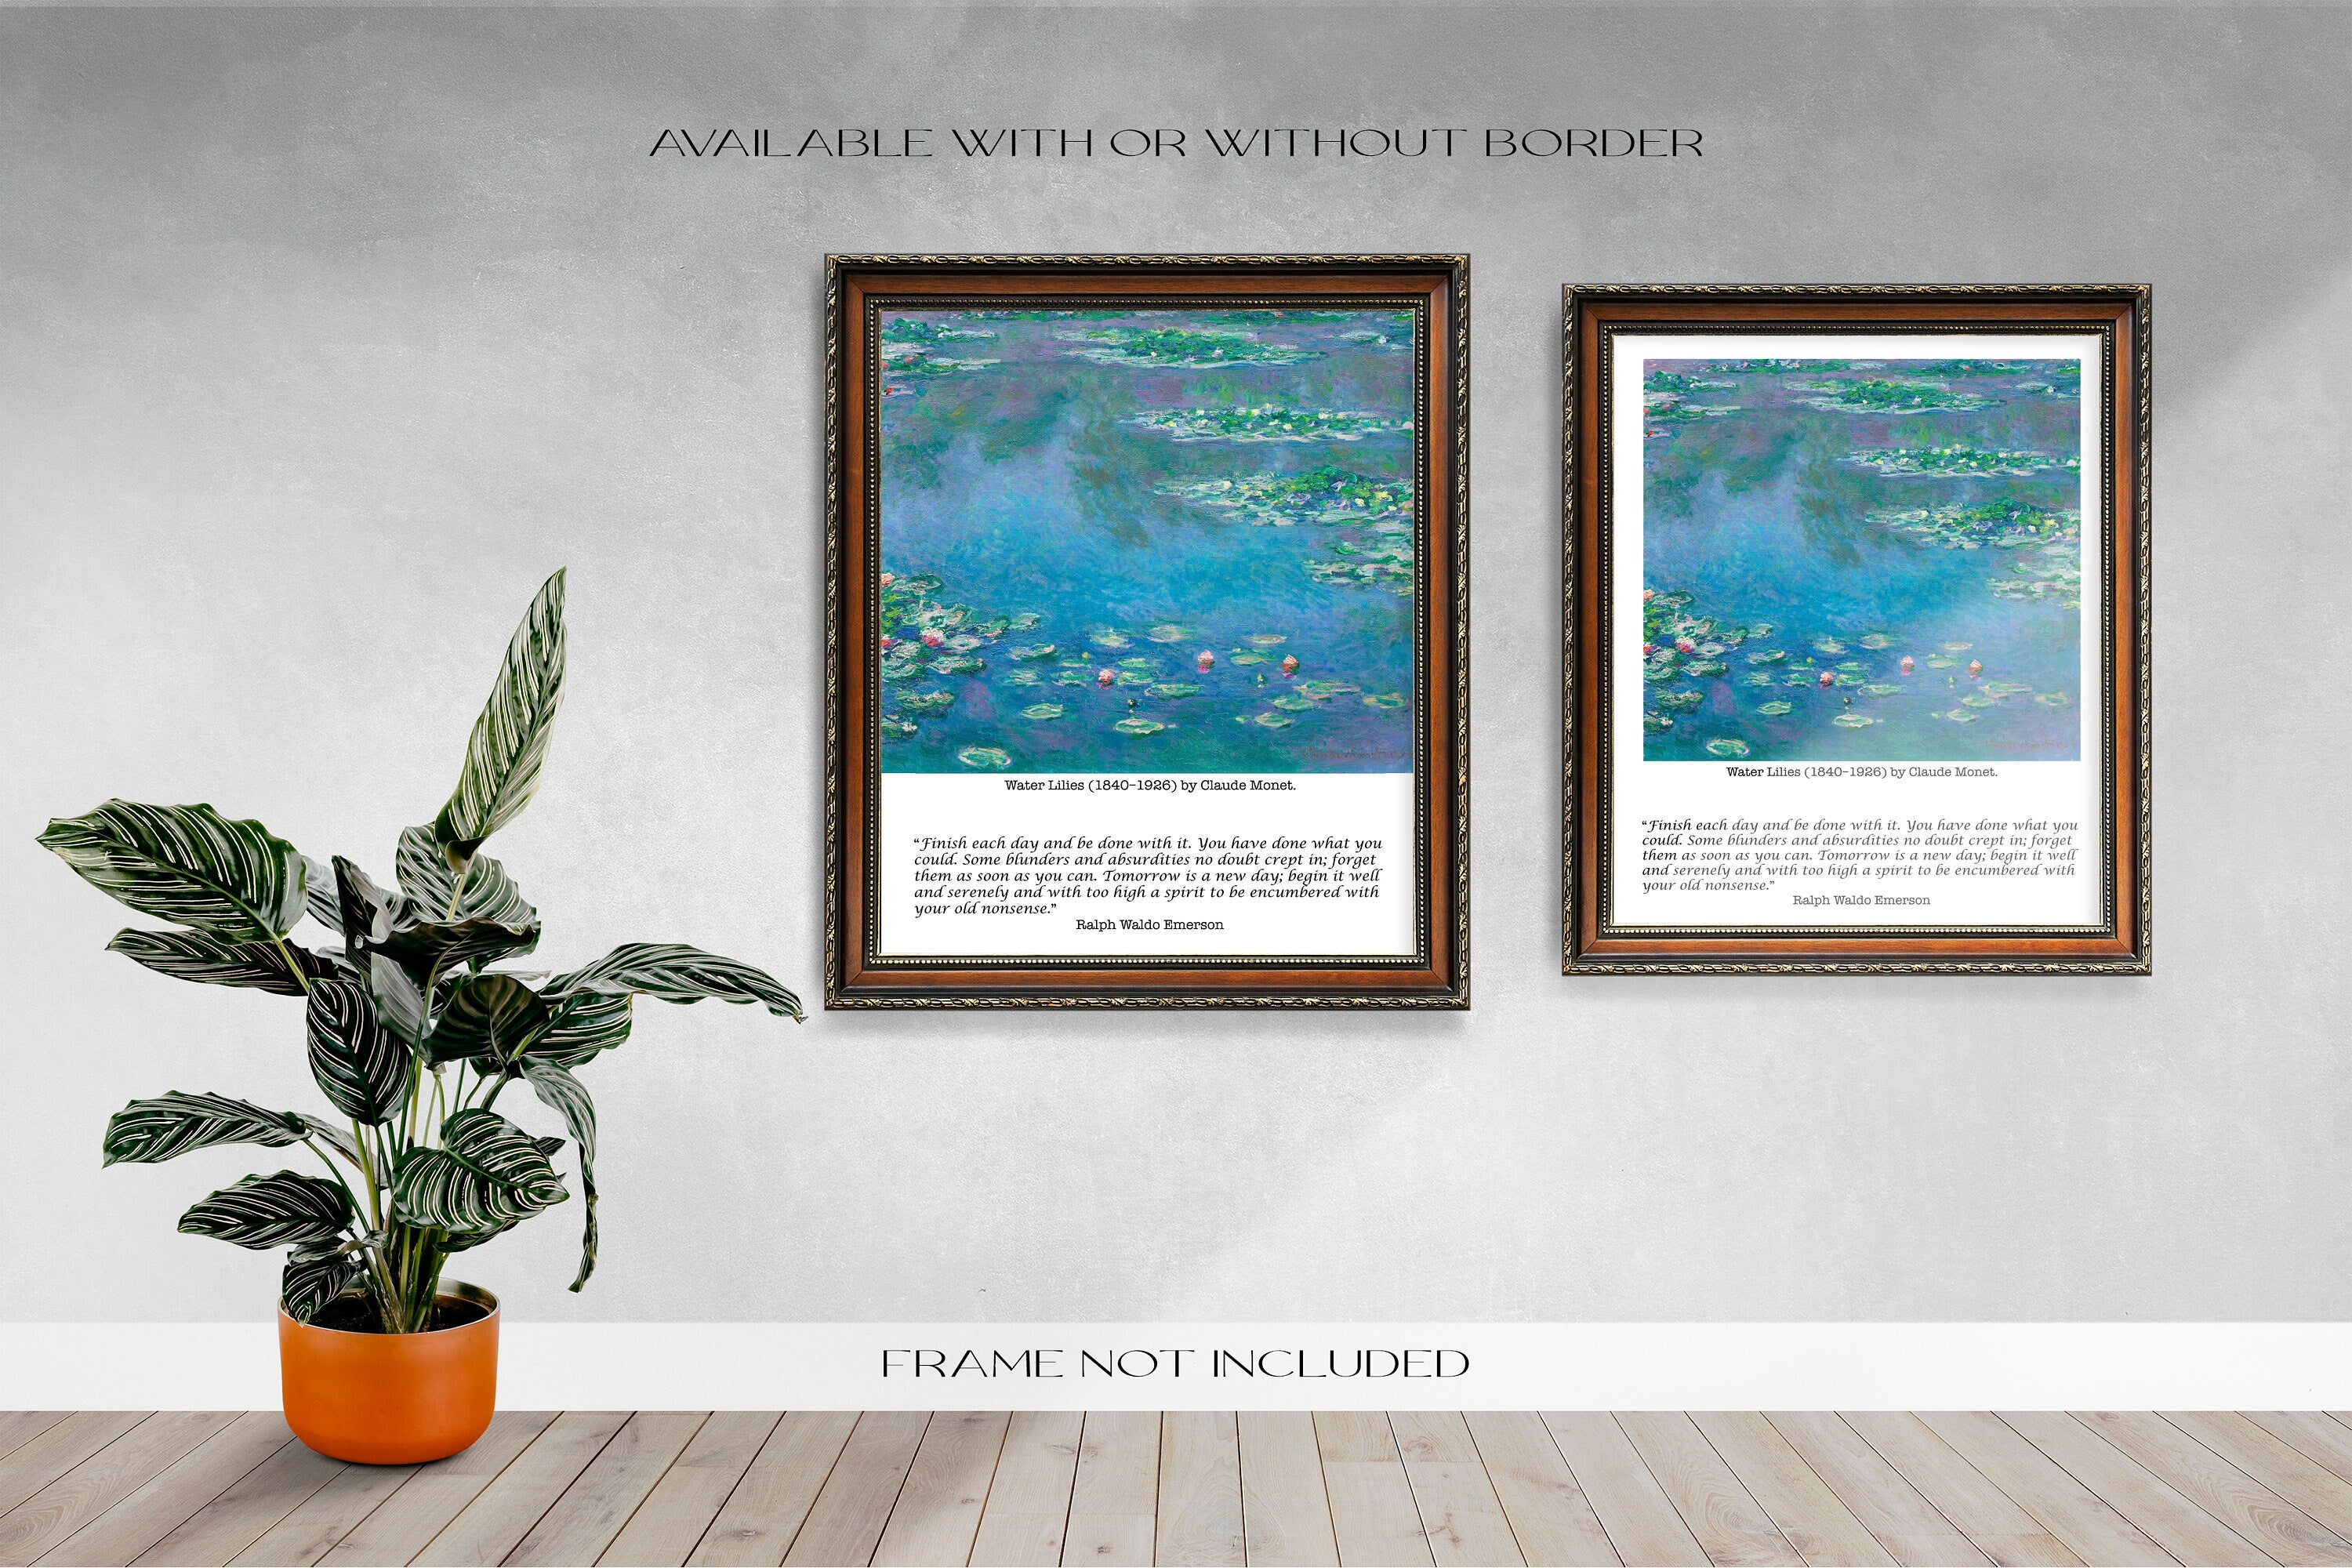 Ralph Waldo Emerson Finish Each Day And Be Done With It Inspirational Quote, Claude Monet Unframed Fine Art Prints - Waterlilies